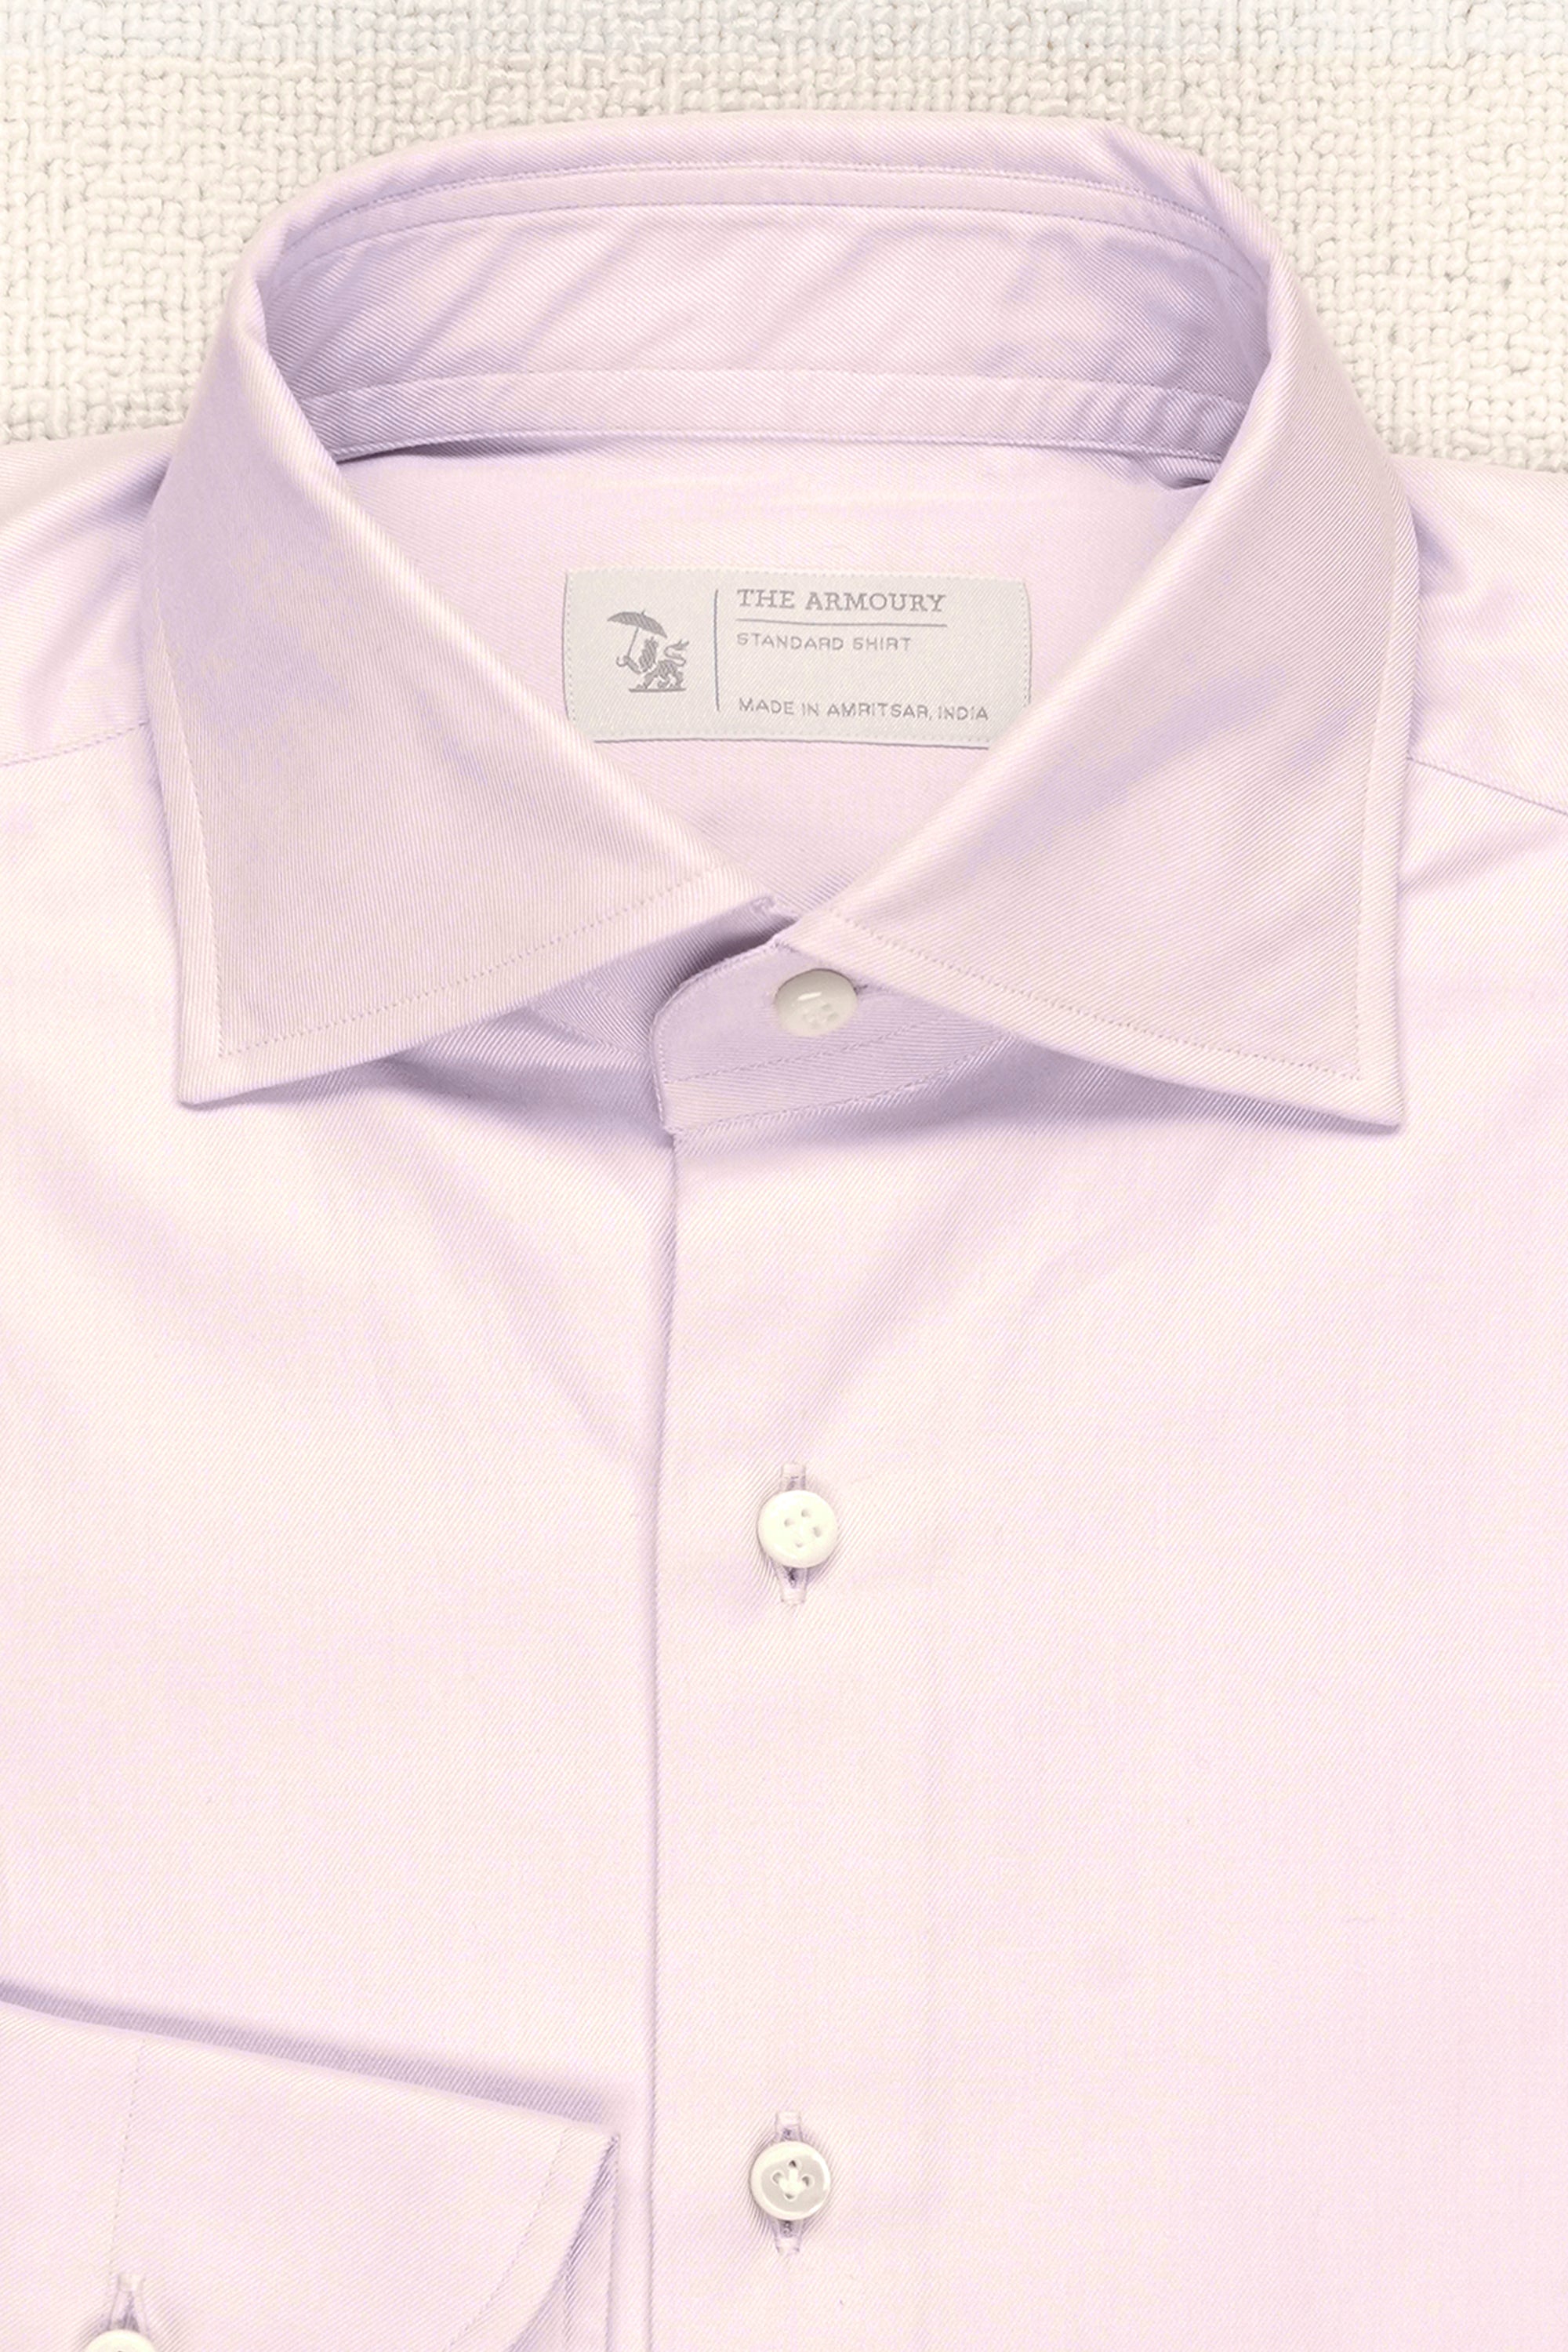 The Armoury by 100 Hands Lavender Cotton Spread Collar Shirt MTM *sample*